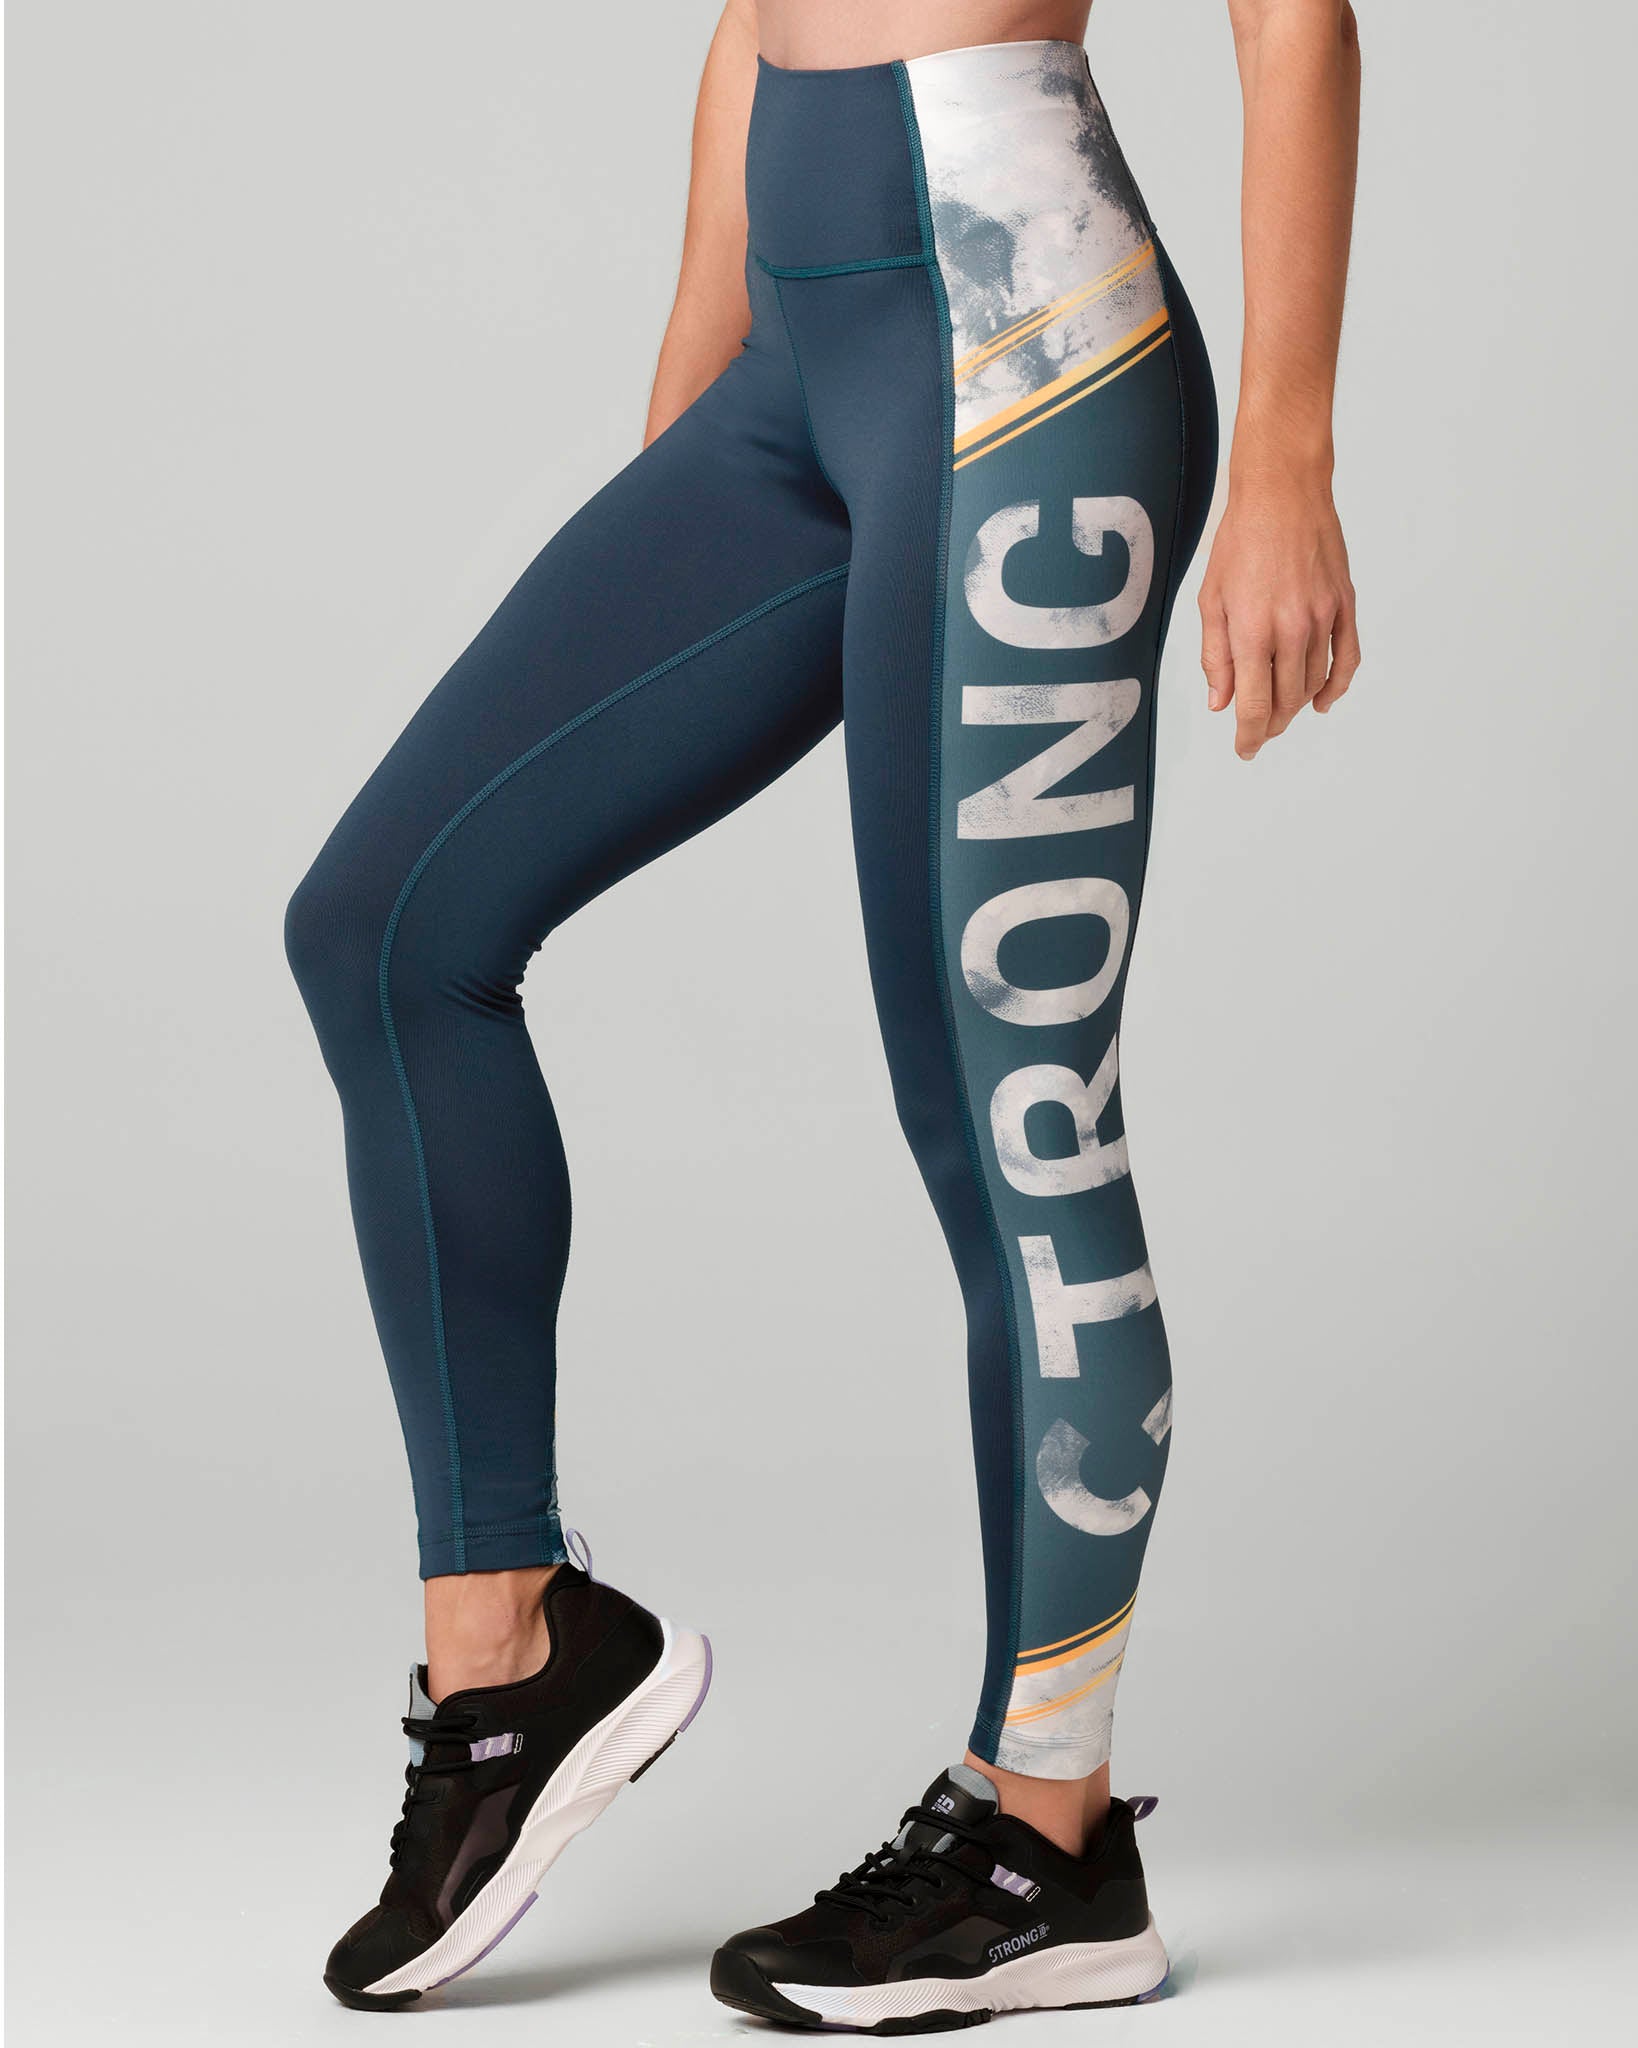 jeans bevolking Ruwe slaap Strong Way Of Life High Waisted Ankle Leggings